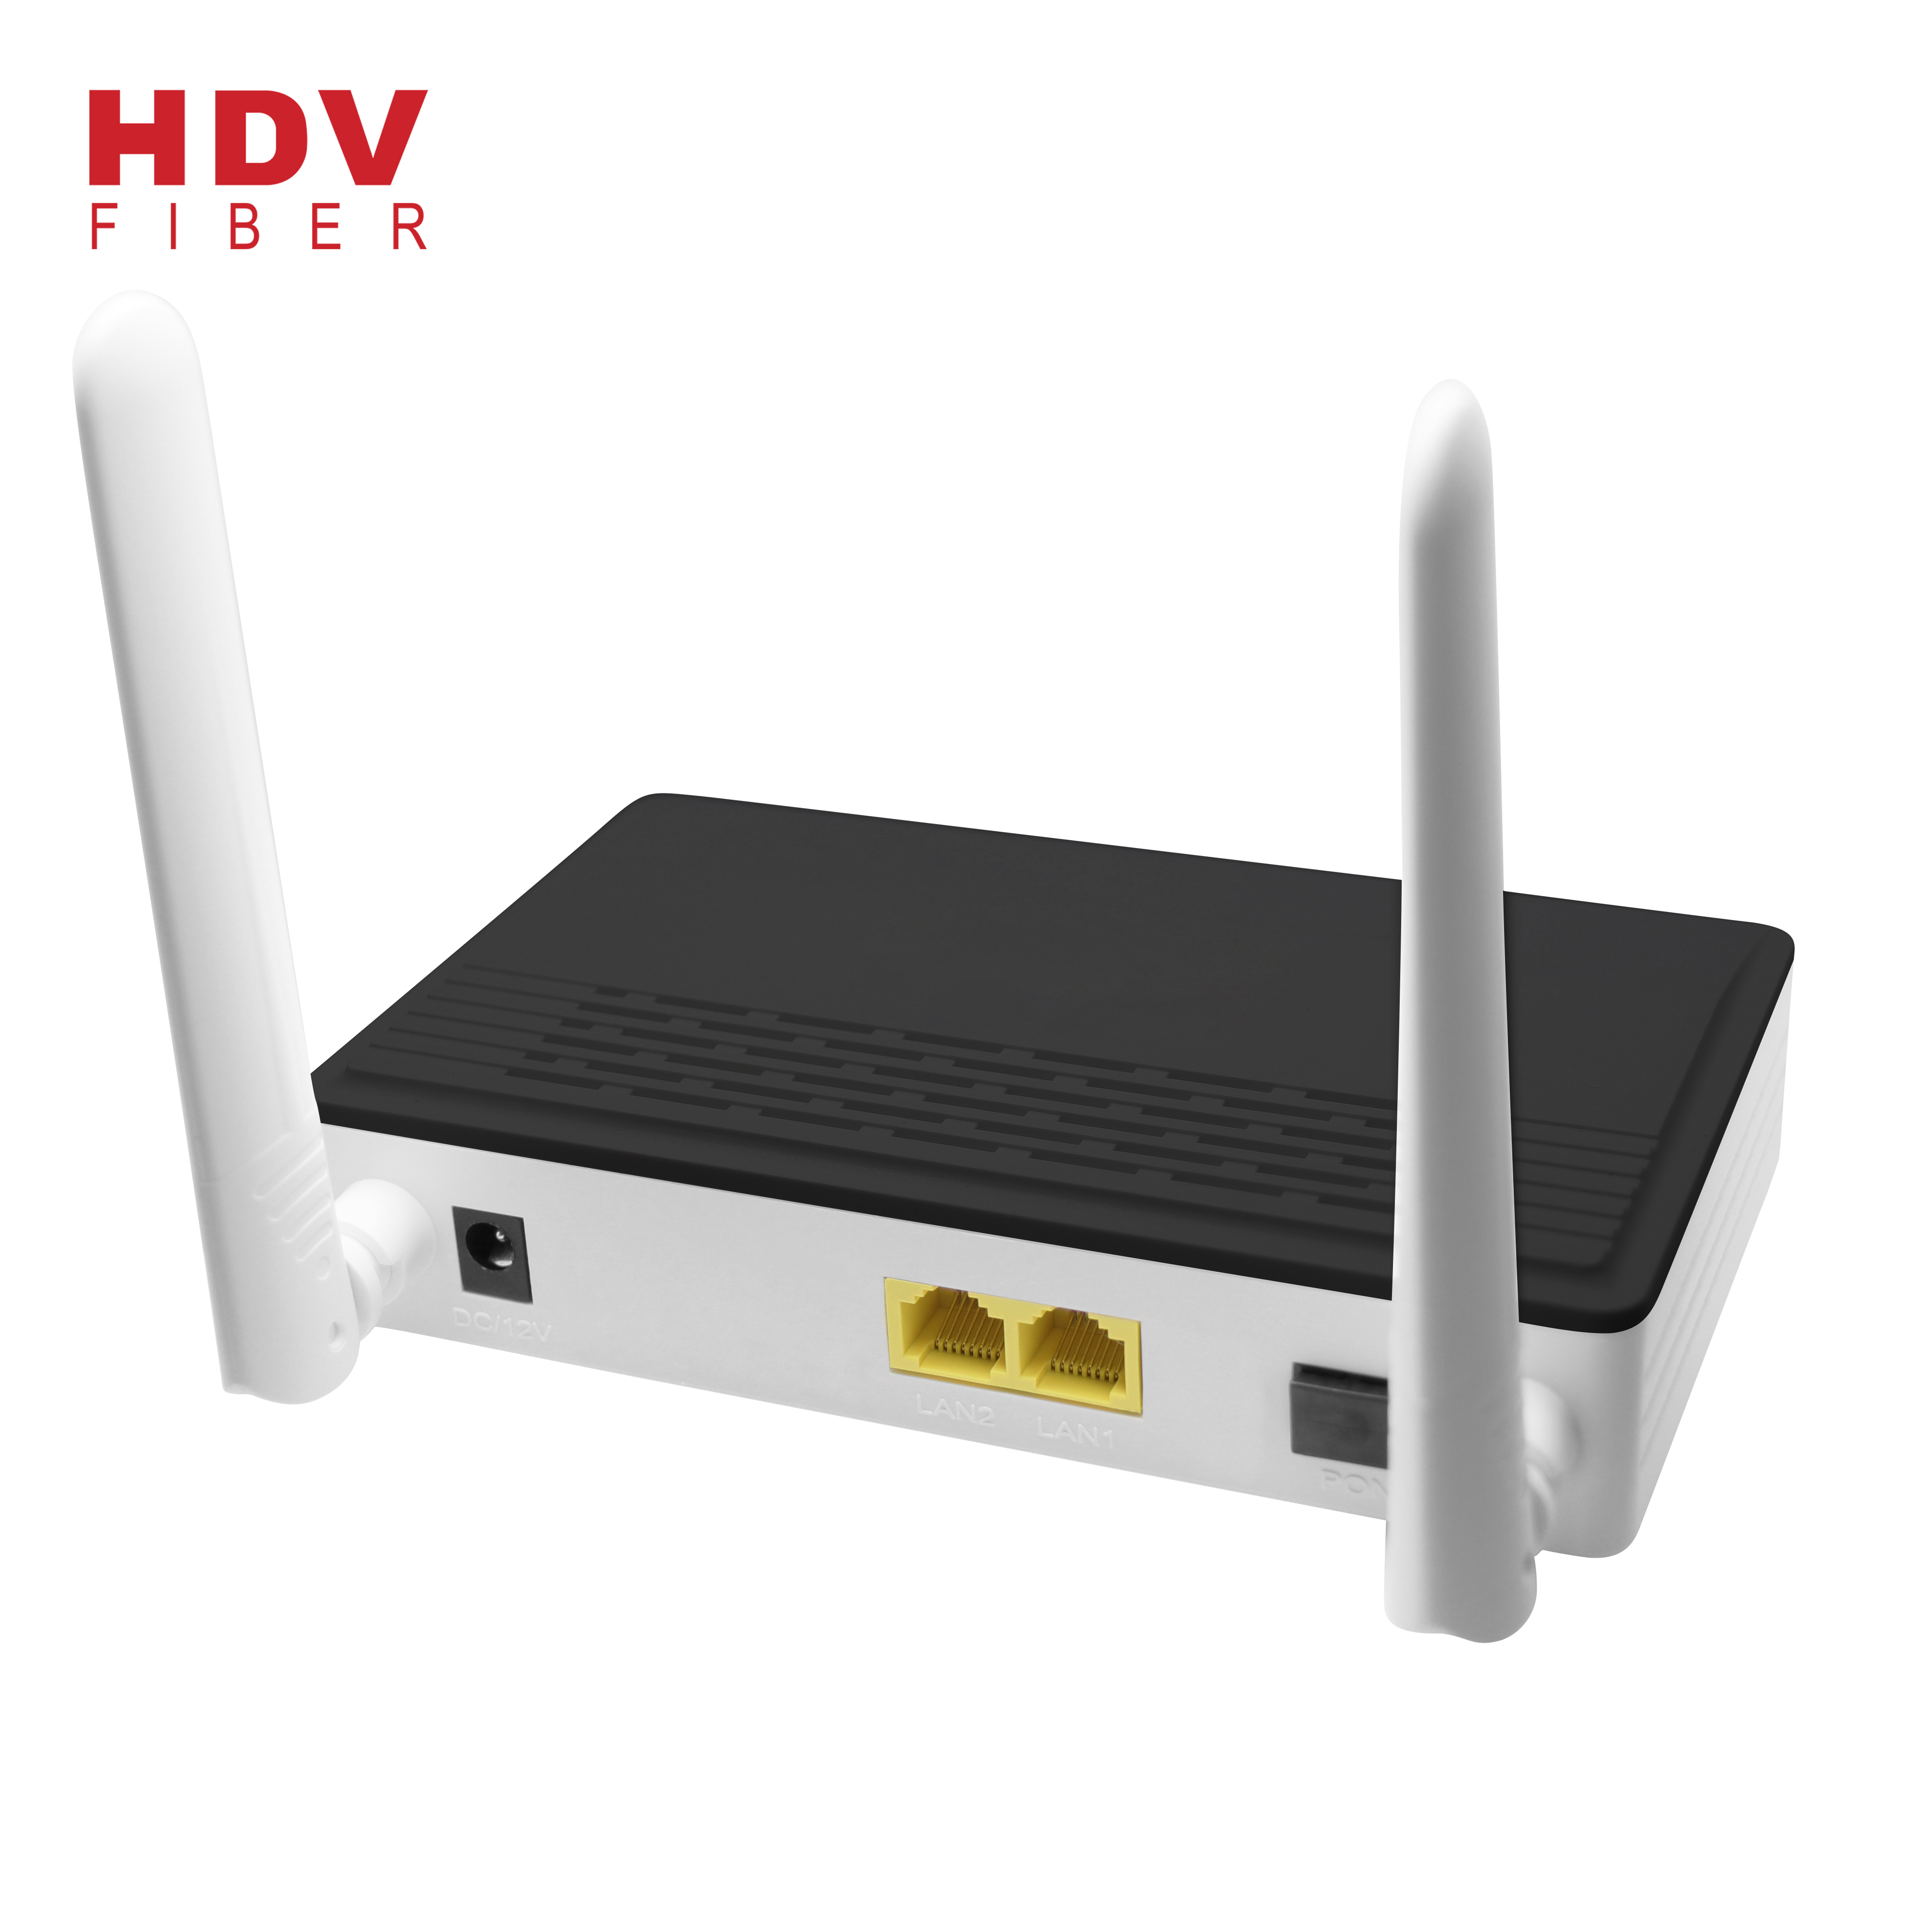 China Manufacturer for Electrical Sfp - HDV New product 1GE+1FE WIFI router gpon ftth onu for huawei – HDV